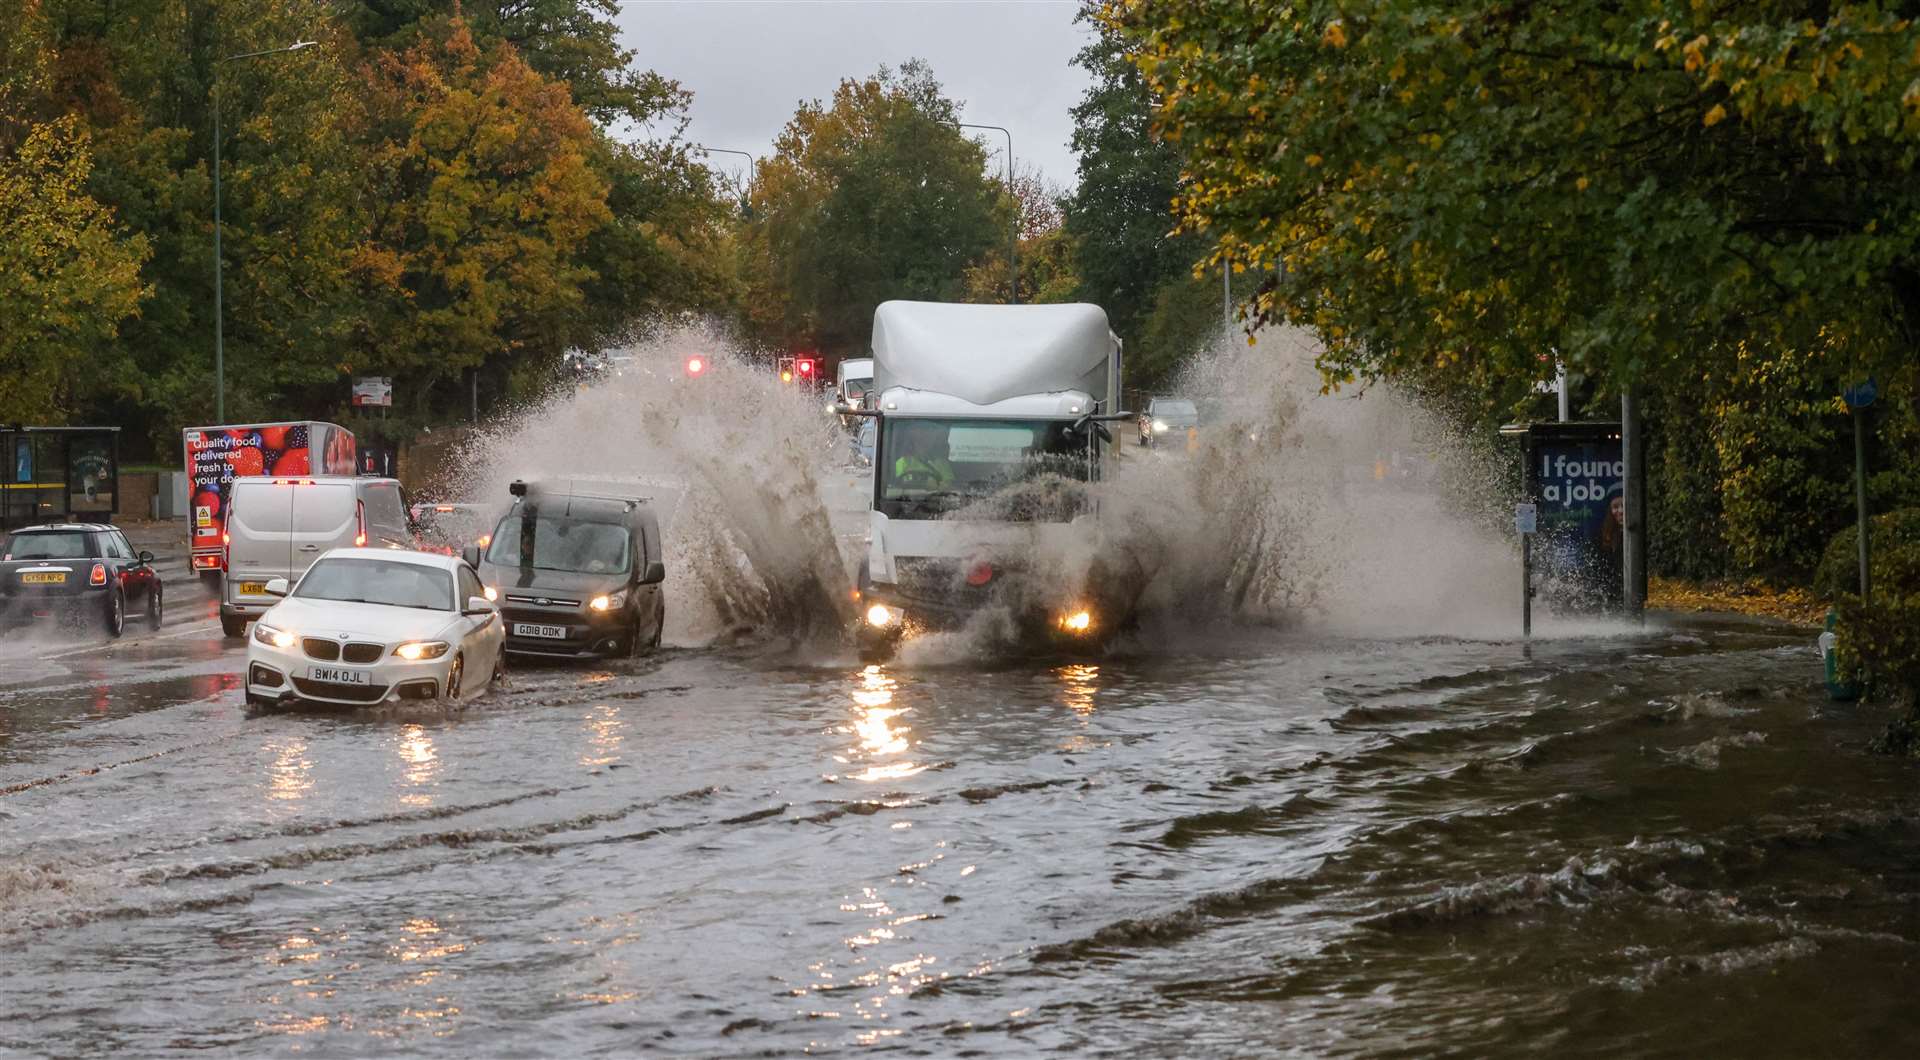 Roads are flooded near Maidstone. Picture: UKNIP